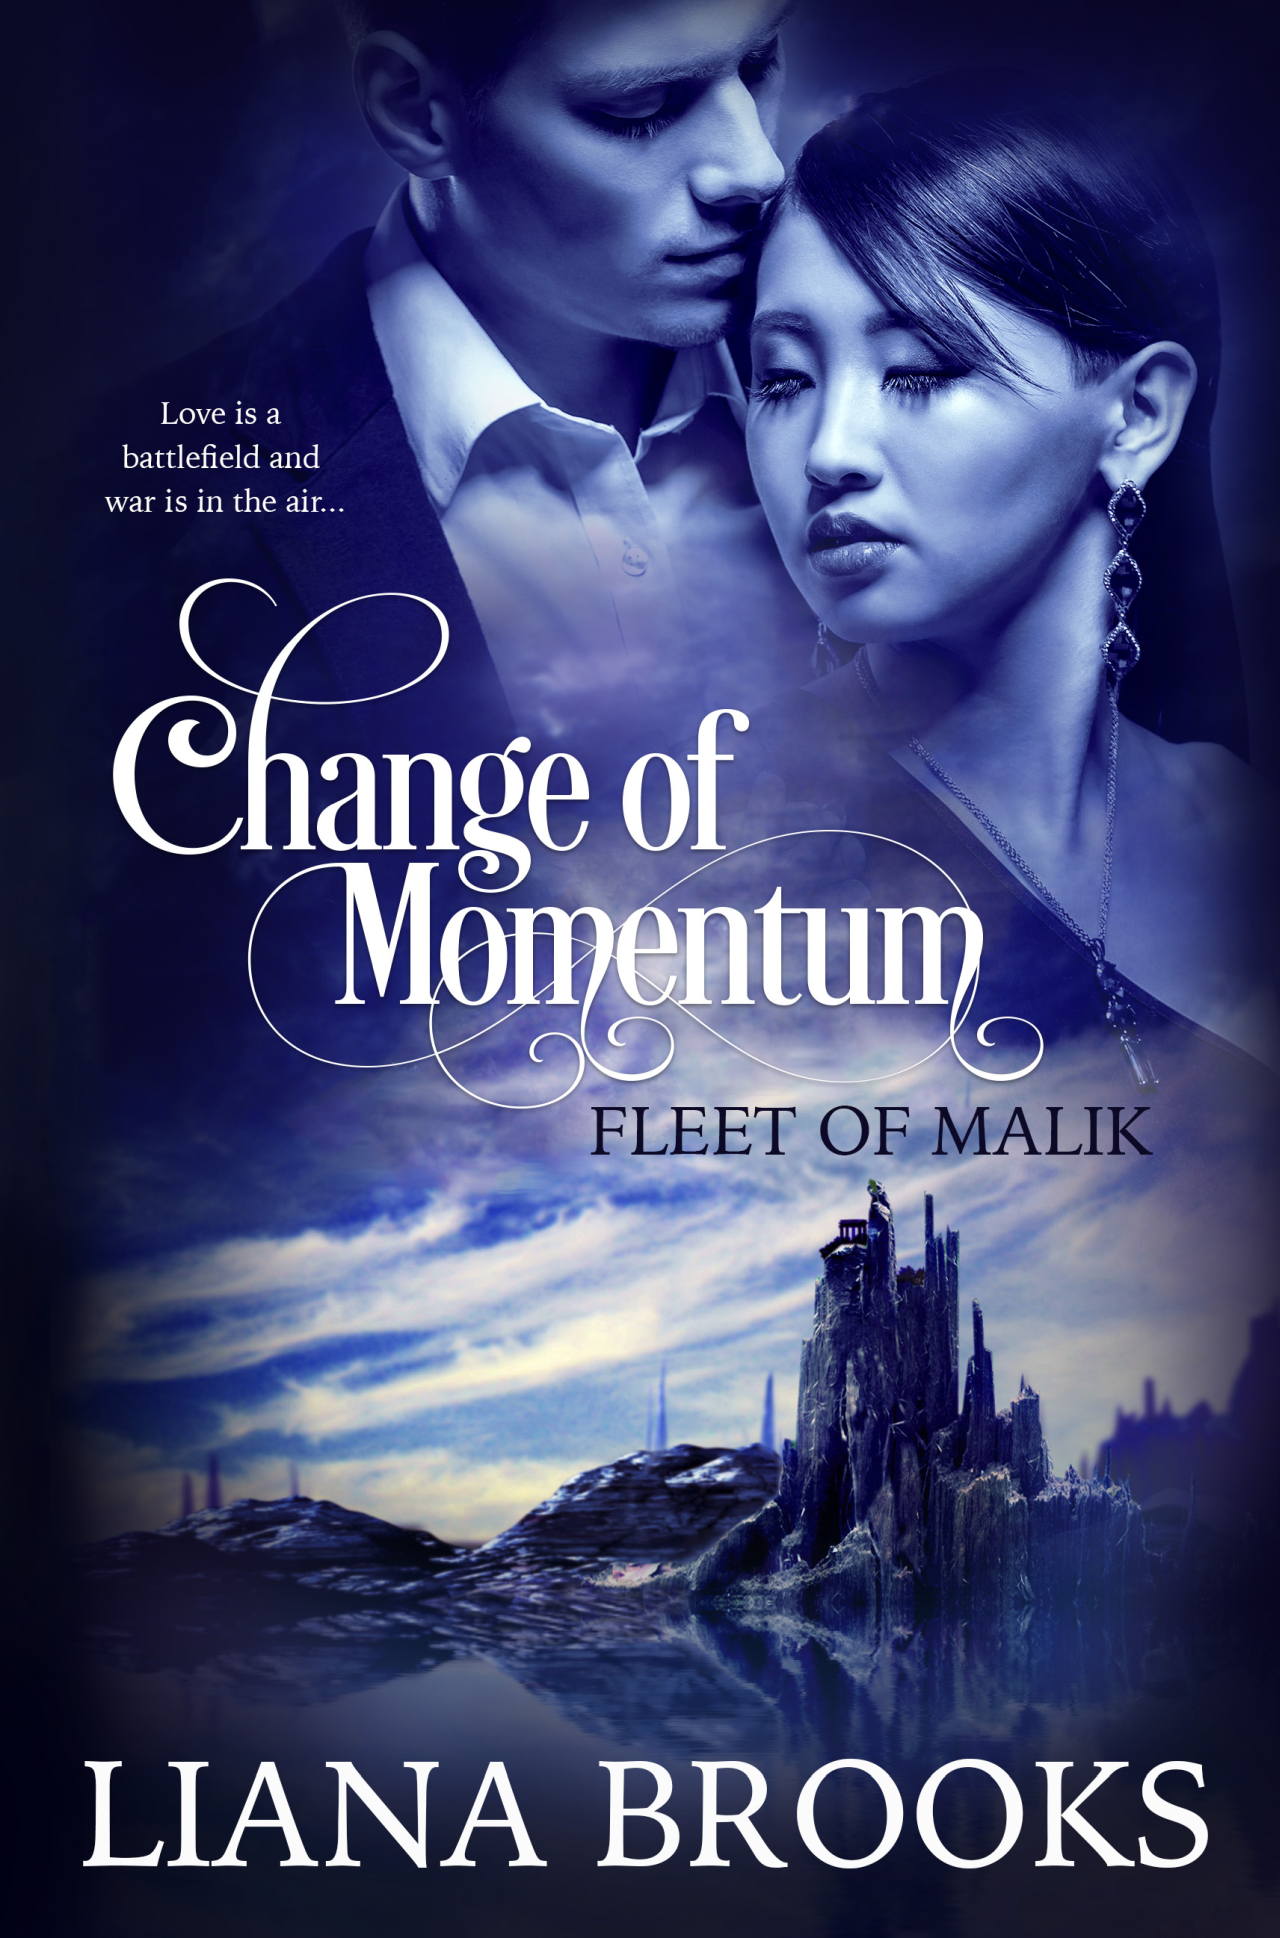 The cover of CHANGE OF MOMENTUM showing a man who appears possibly European in descent and an Asian woman together with her head resting against his chest in a sly sky above an alien city skyline.